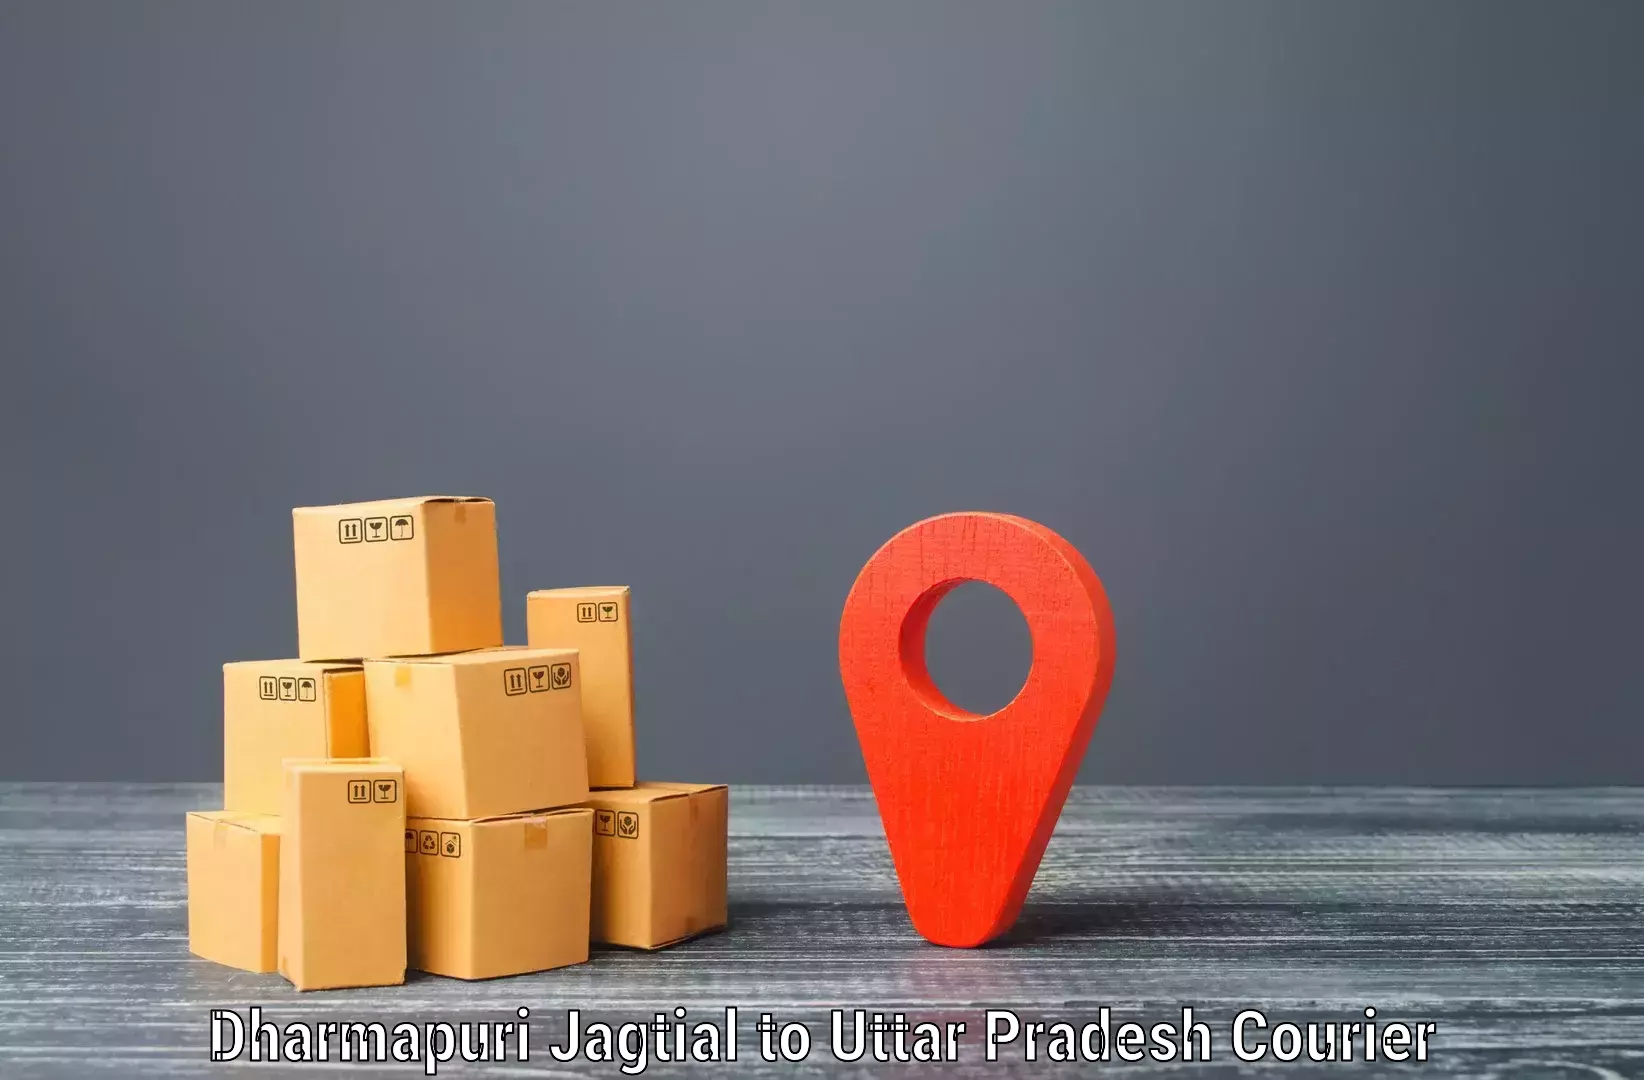 Personal courier services Dharmapuri Jagtial to Sitapur